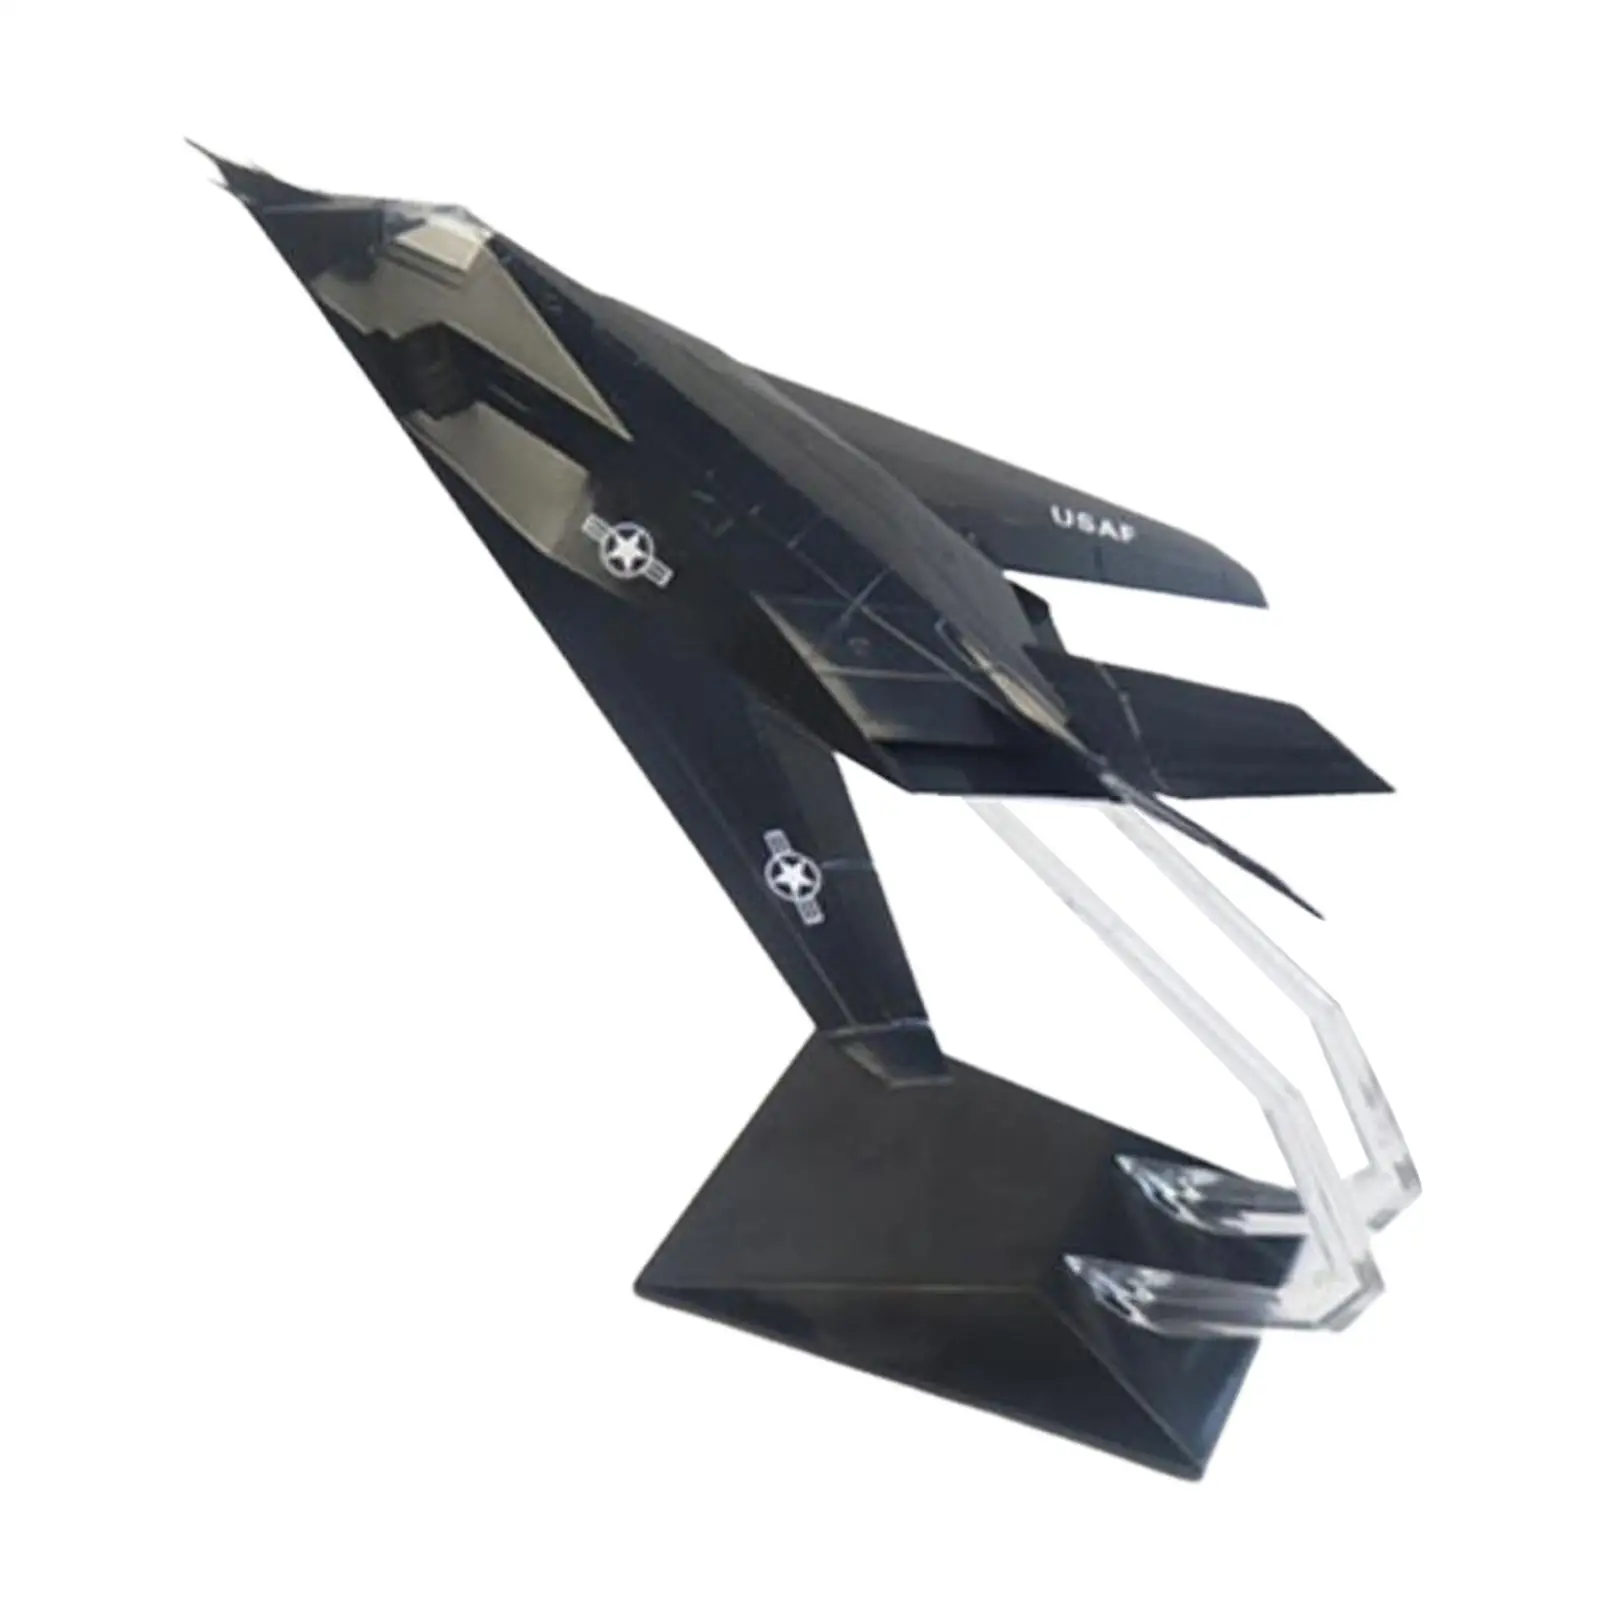 1:72 Scale F117 Aircraft Model Toy with Display Stand Ornament Simulation Plane Toy for Desktop Shelf Keepsake Decoration